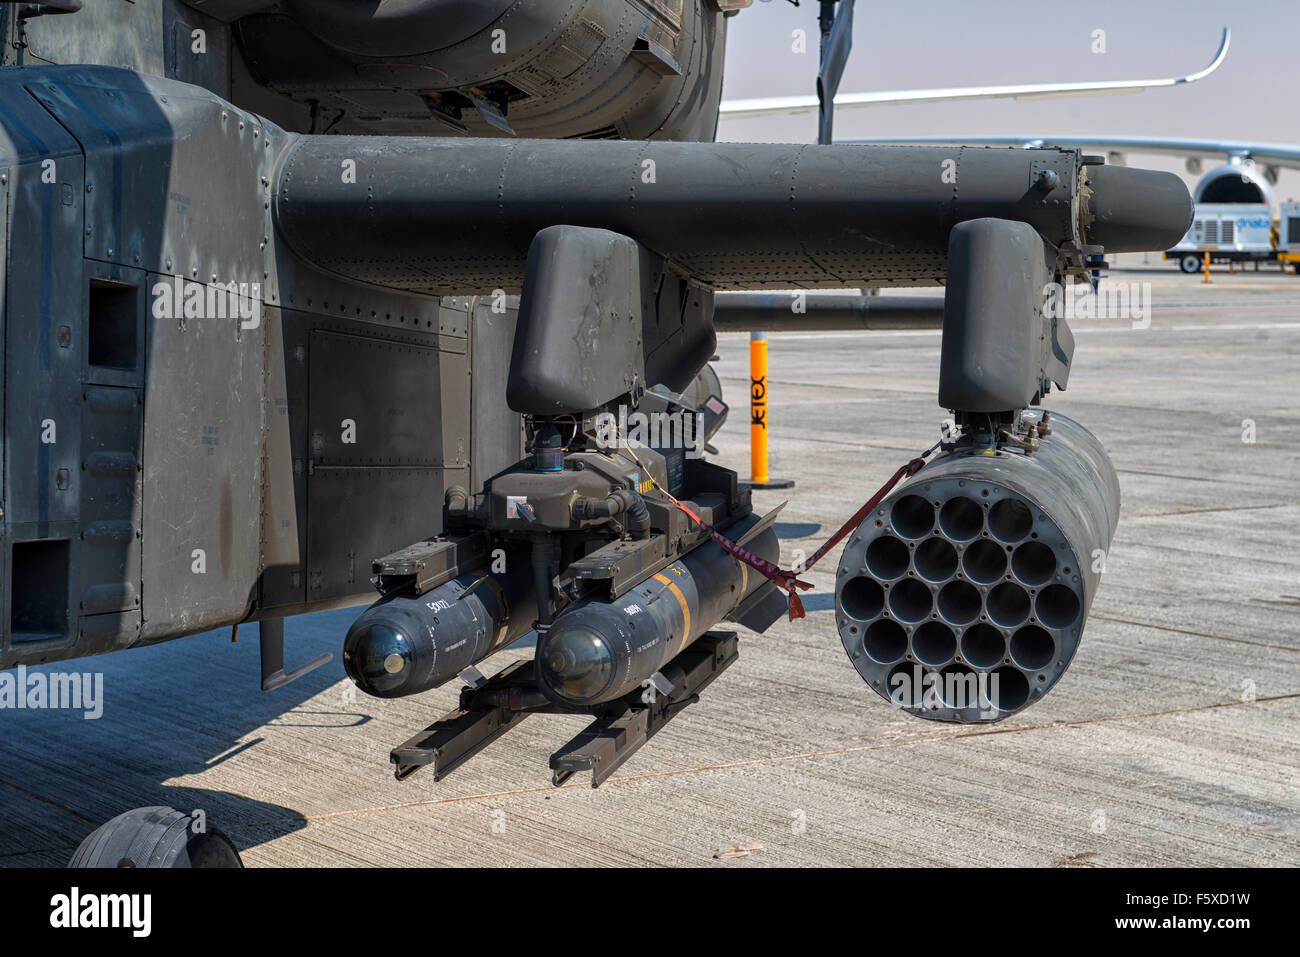 Weapons Holder on AH-64 Apache Helicopter at Dubai Air Show 2015 in Dubai, UAE Stock Photo